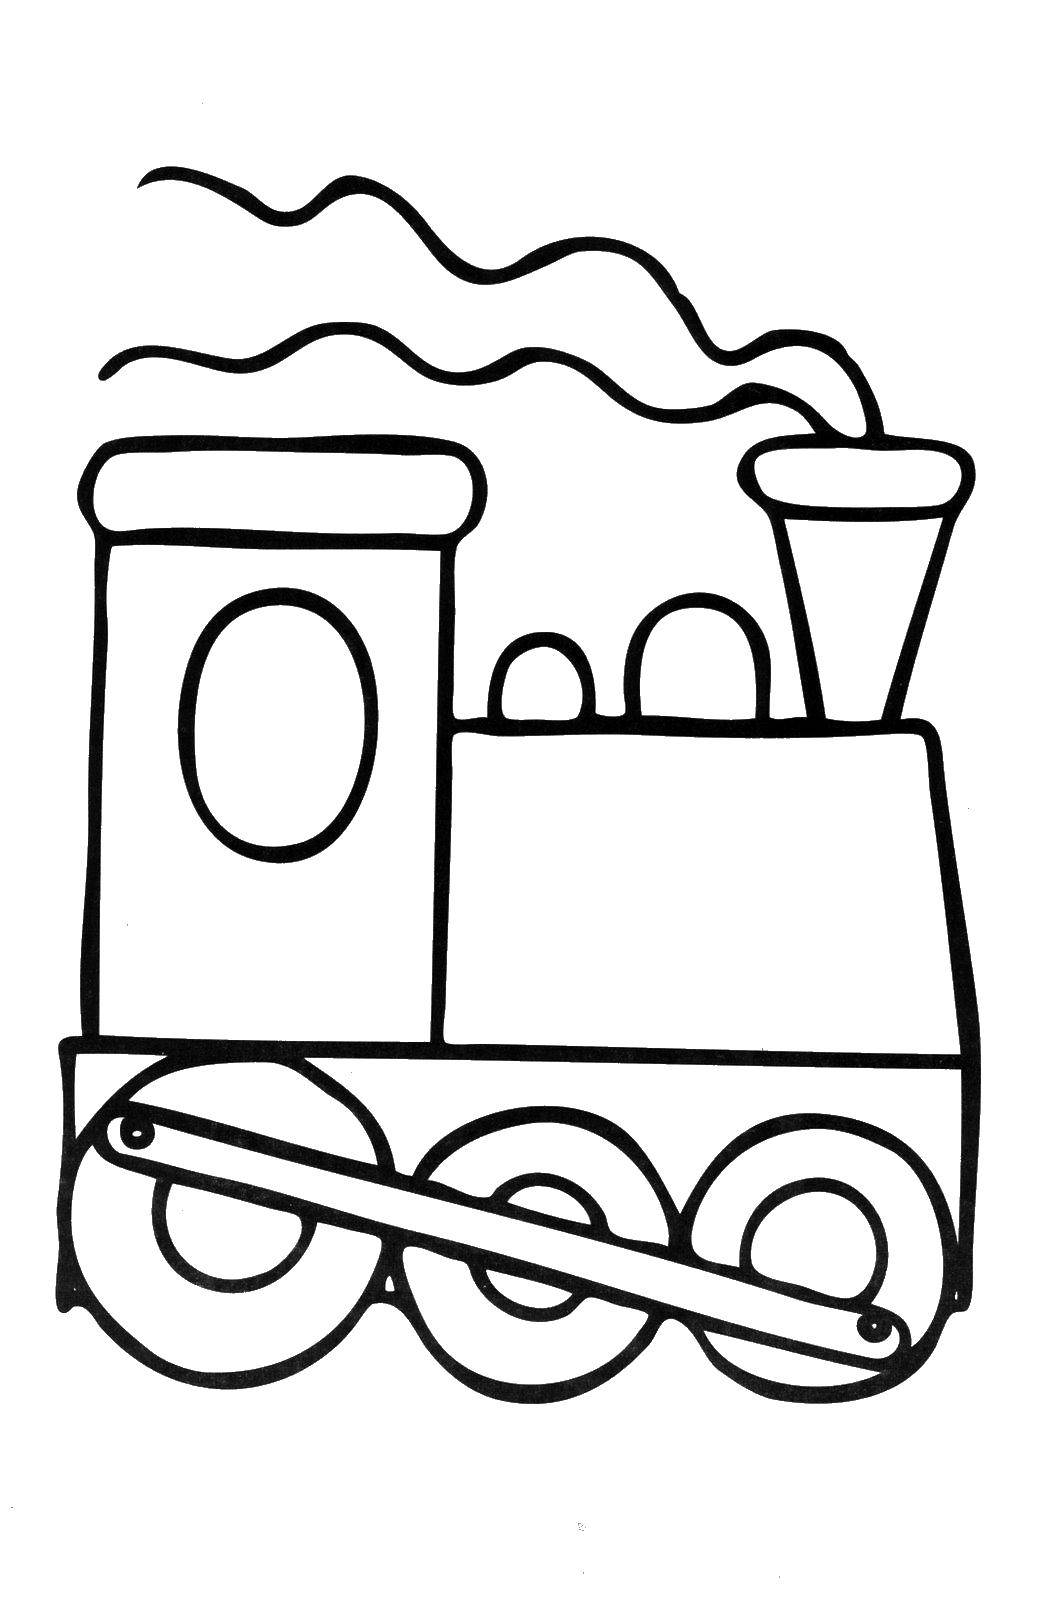 Coloring Fuming train. Category coloring. Tags:  Train.